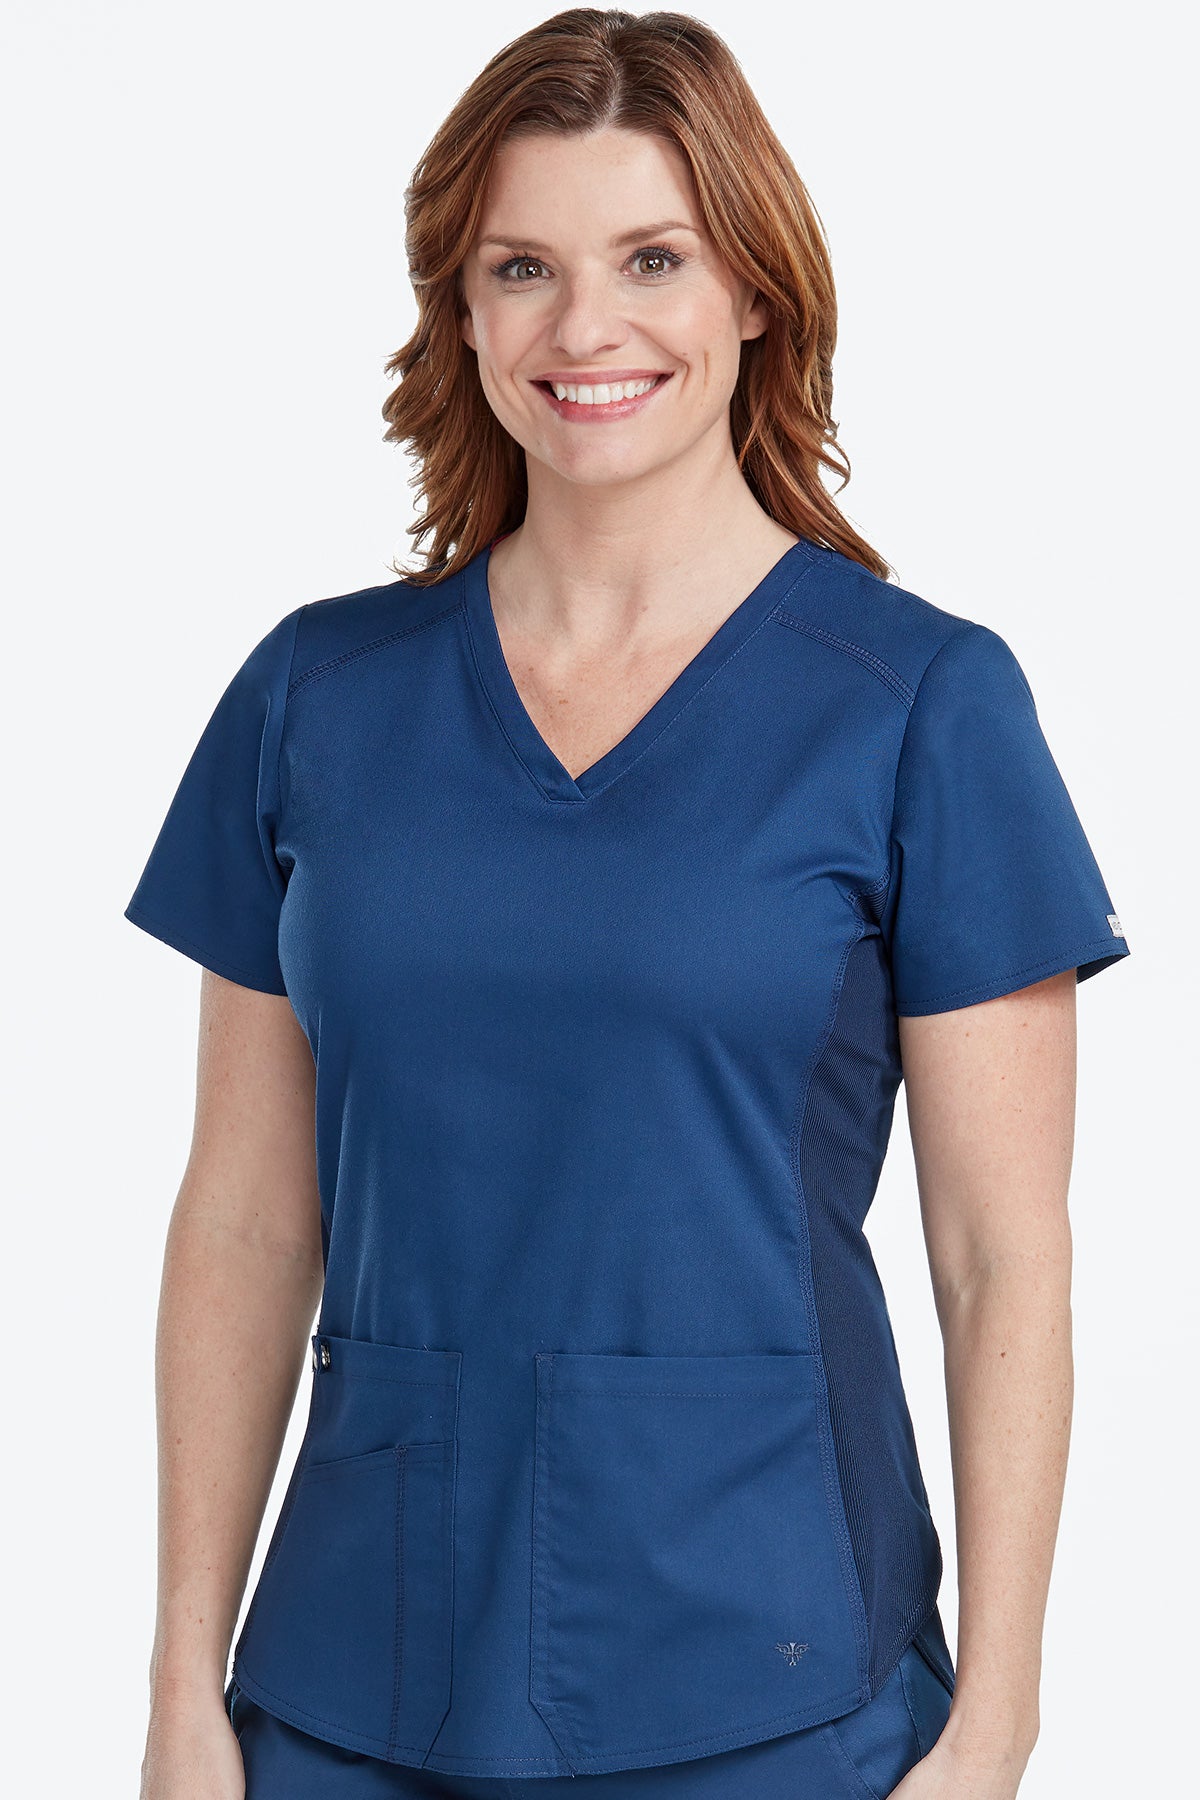 Med Couture Scrub Top Touch Shirttail V-Neck in Navy at Parker's Clothing and Shoes.